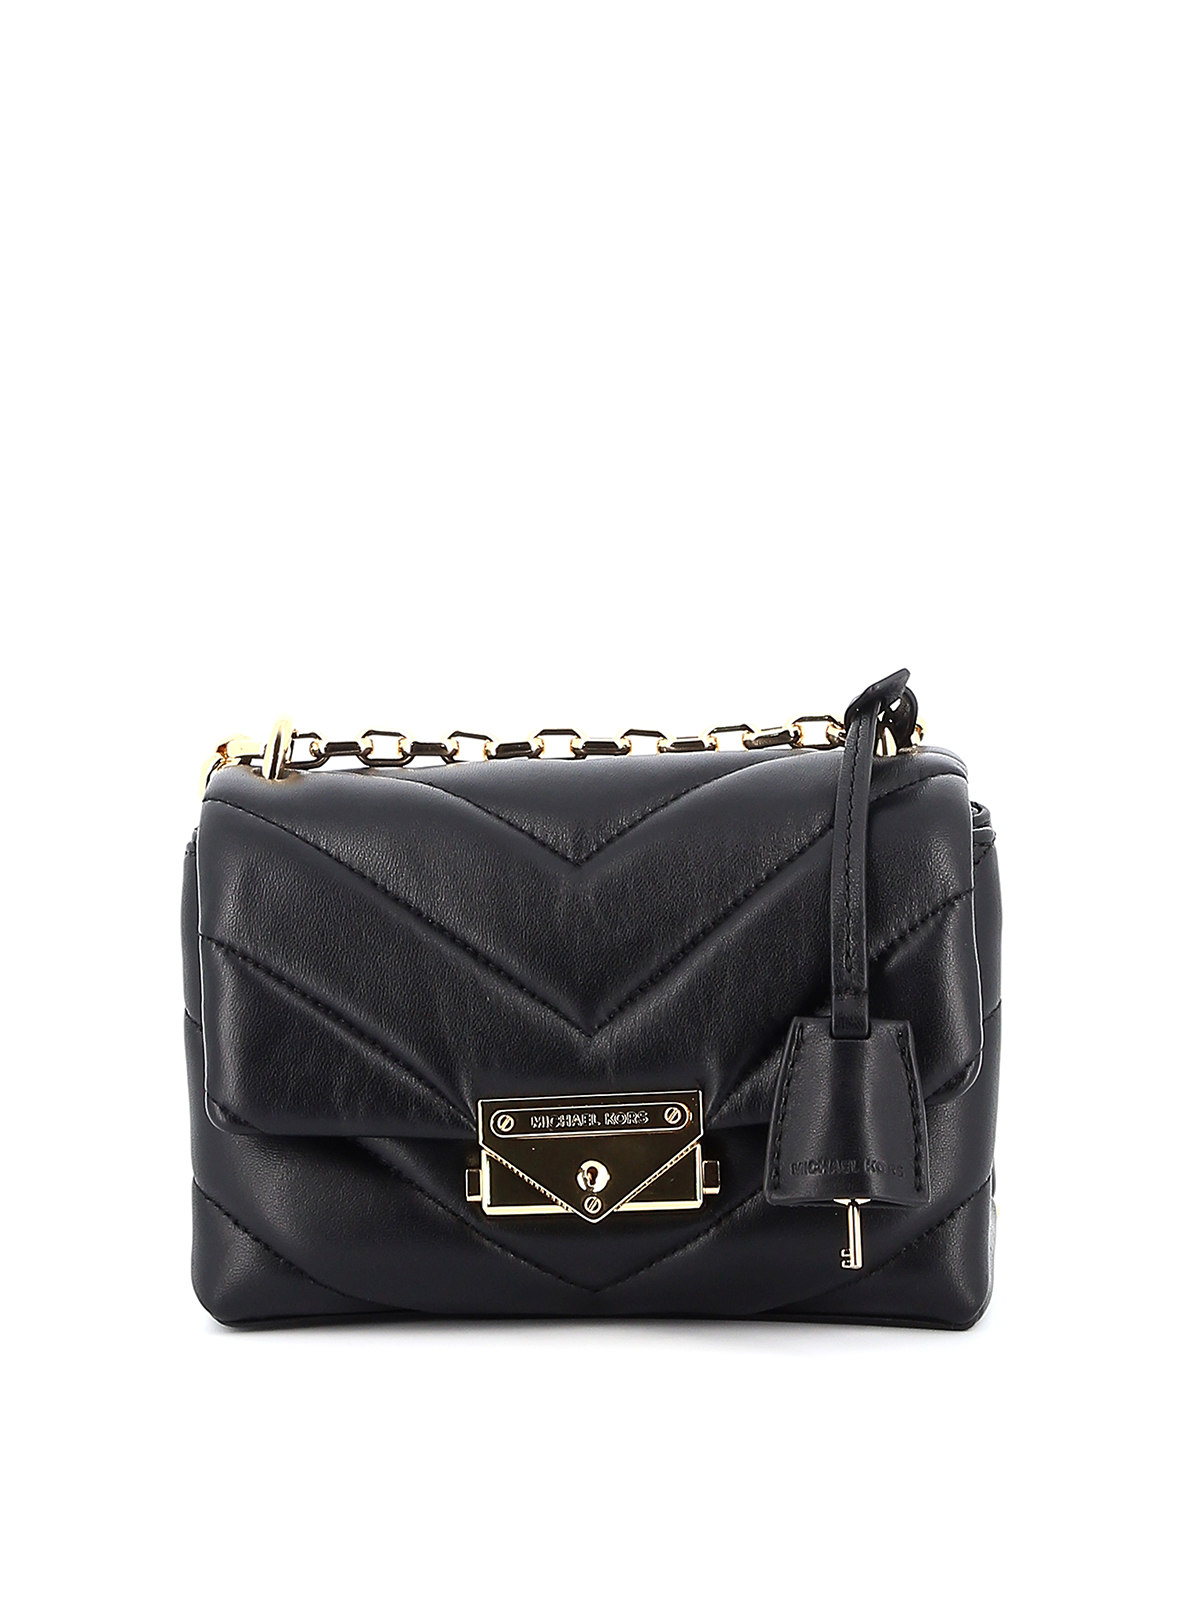 Michael Kors Cece Extra Small Shoulder Bag In Black Quilted Leather Black